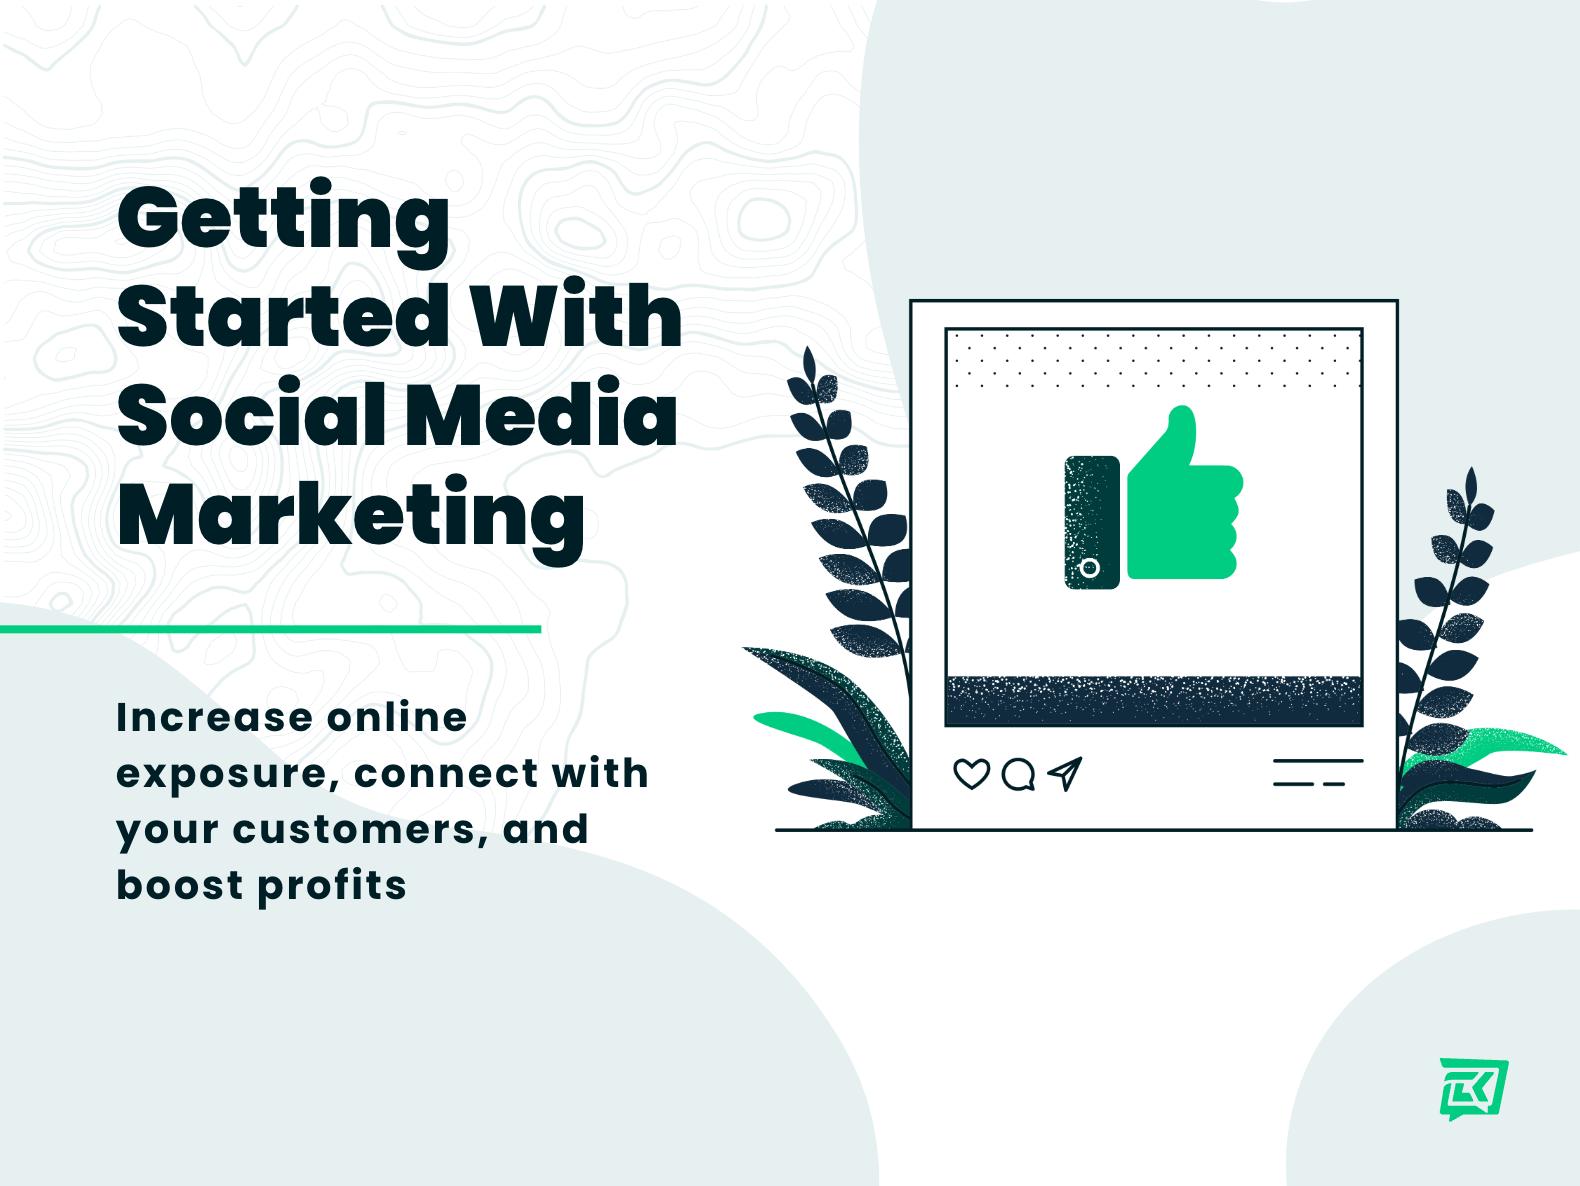 Getting Started With Social Media Marketing